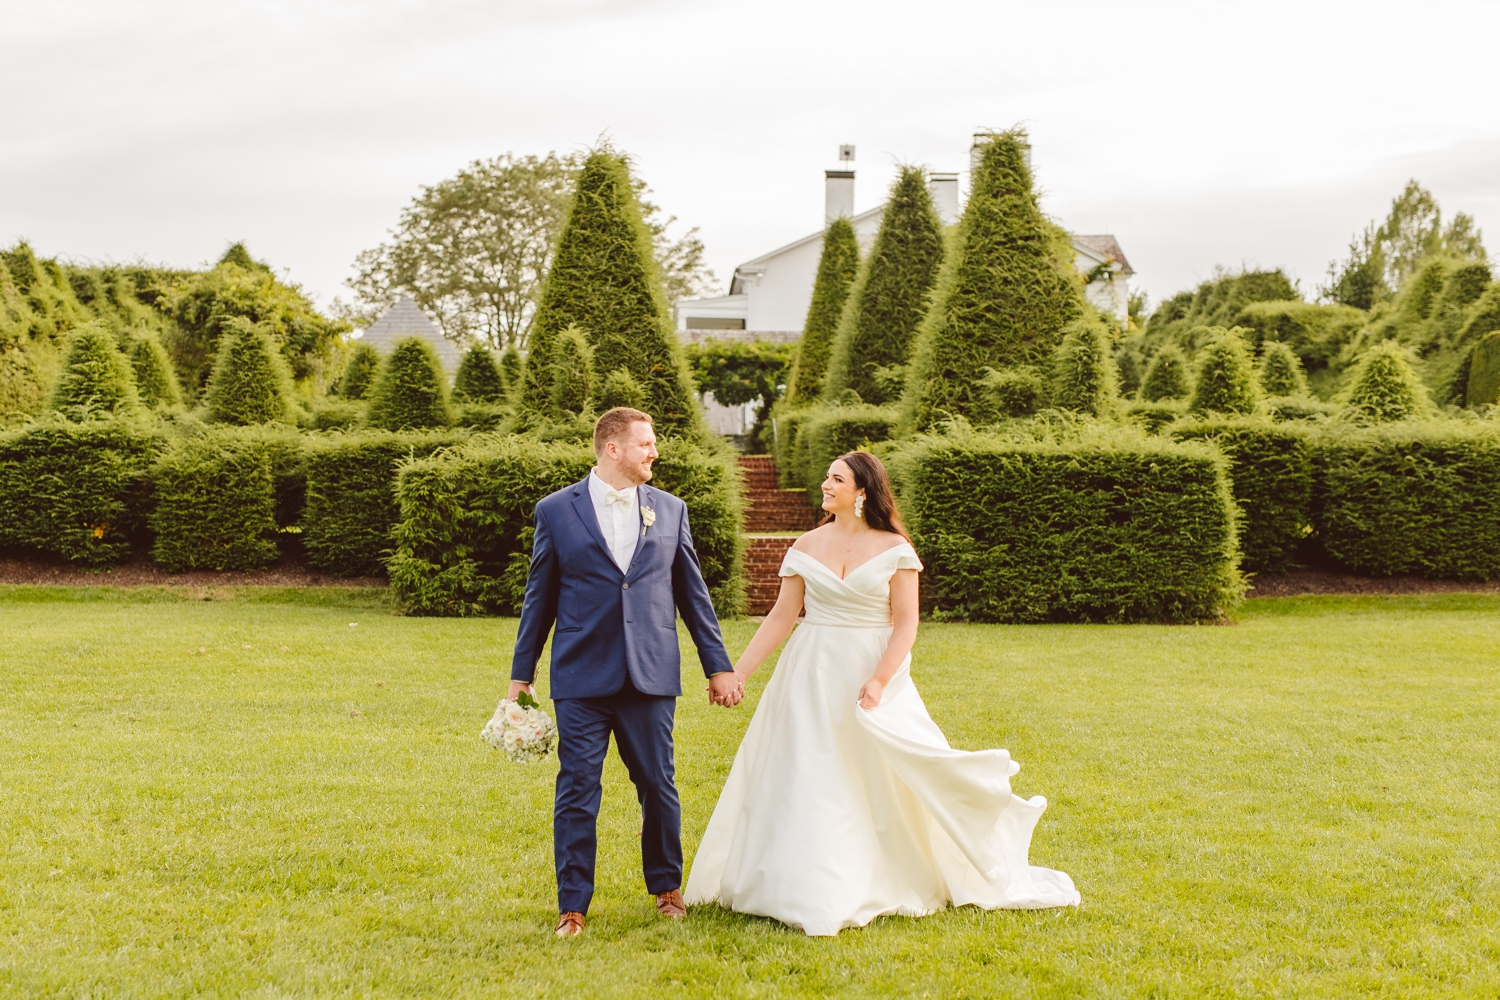 Bride and groom holding hands and walking at Ladew Topiary Gardens wedding | Brooke Michelle Photo